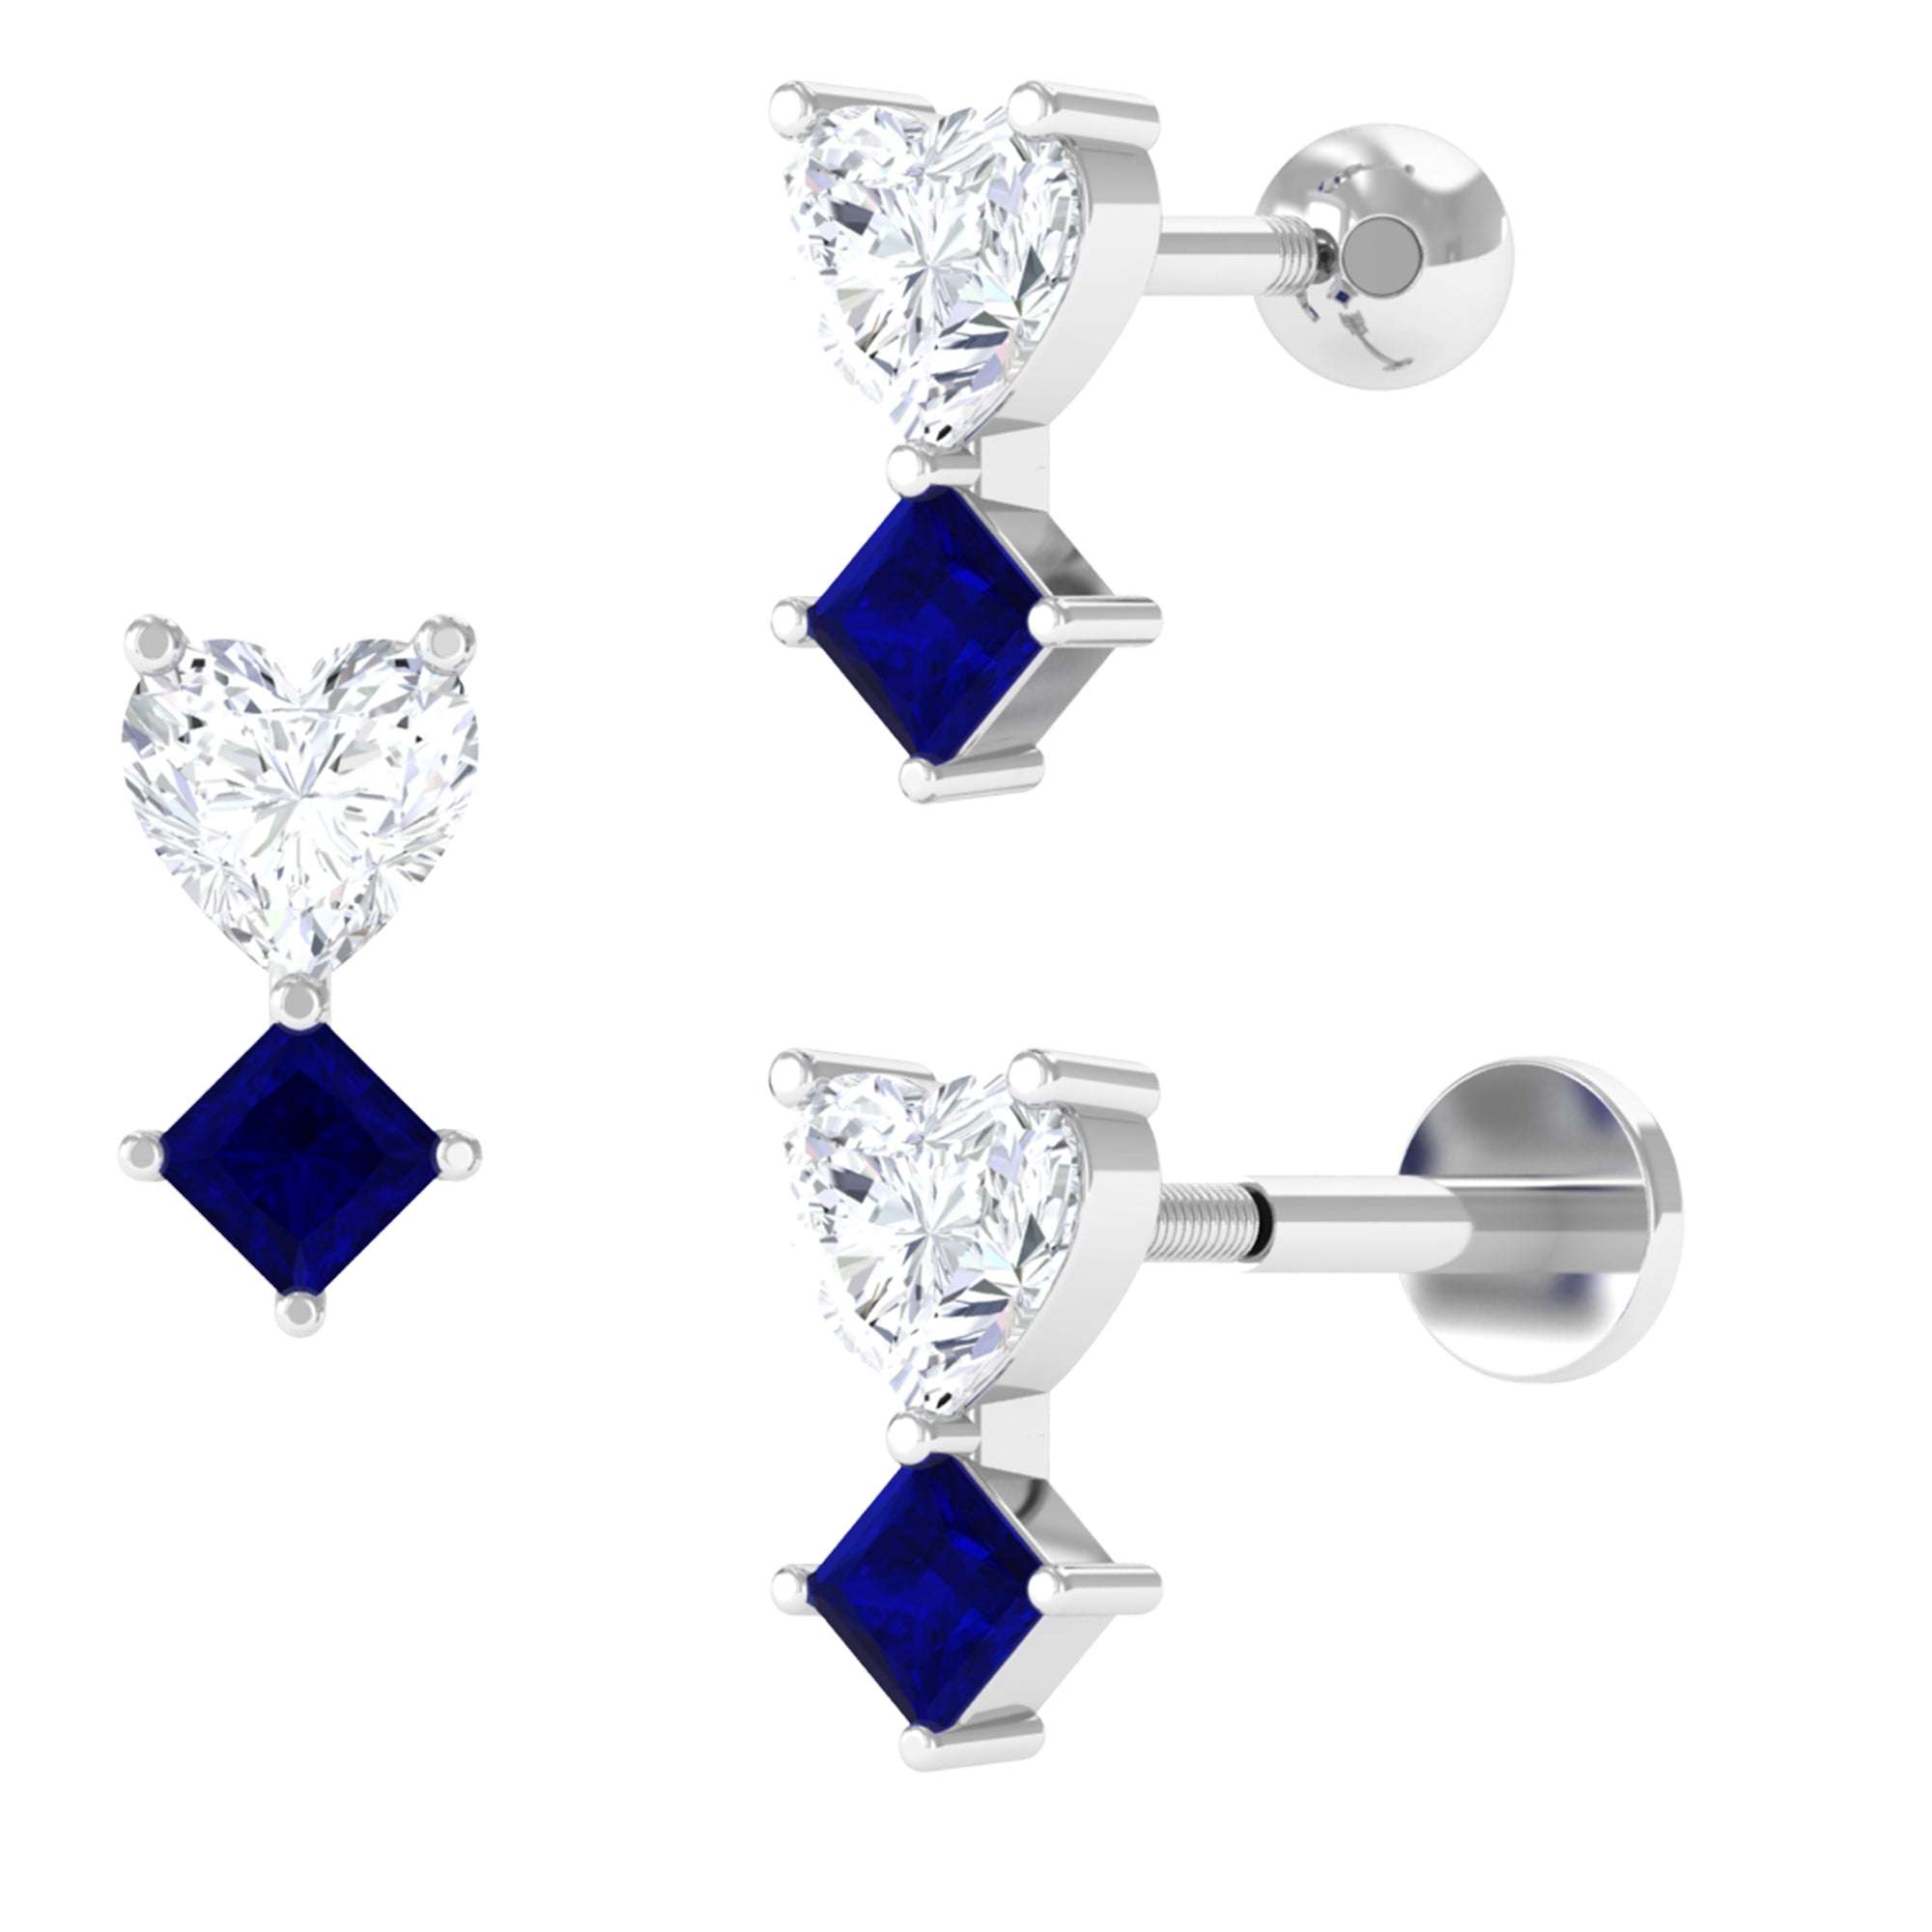 Sparkanite Jewels-Moissanite Heart Tragus Earring with Blue Sapphire